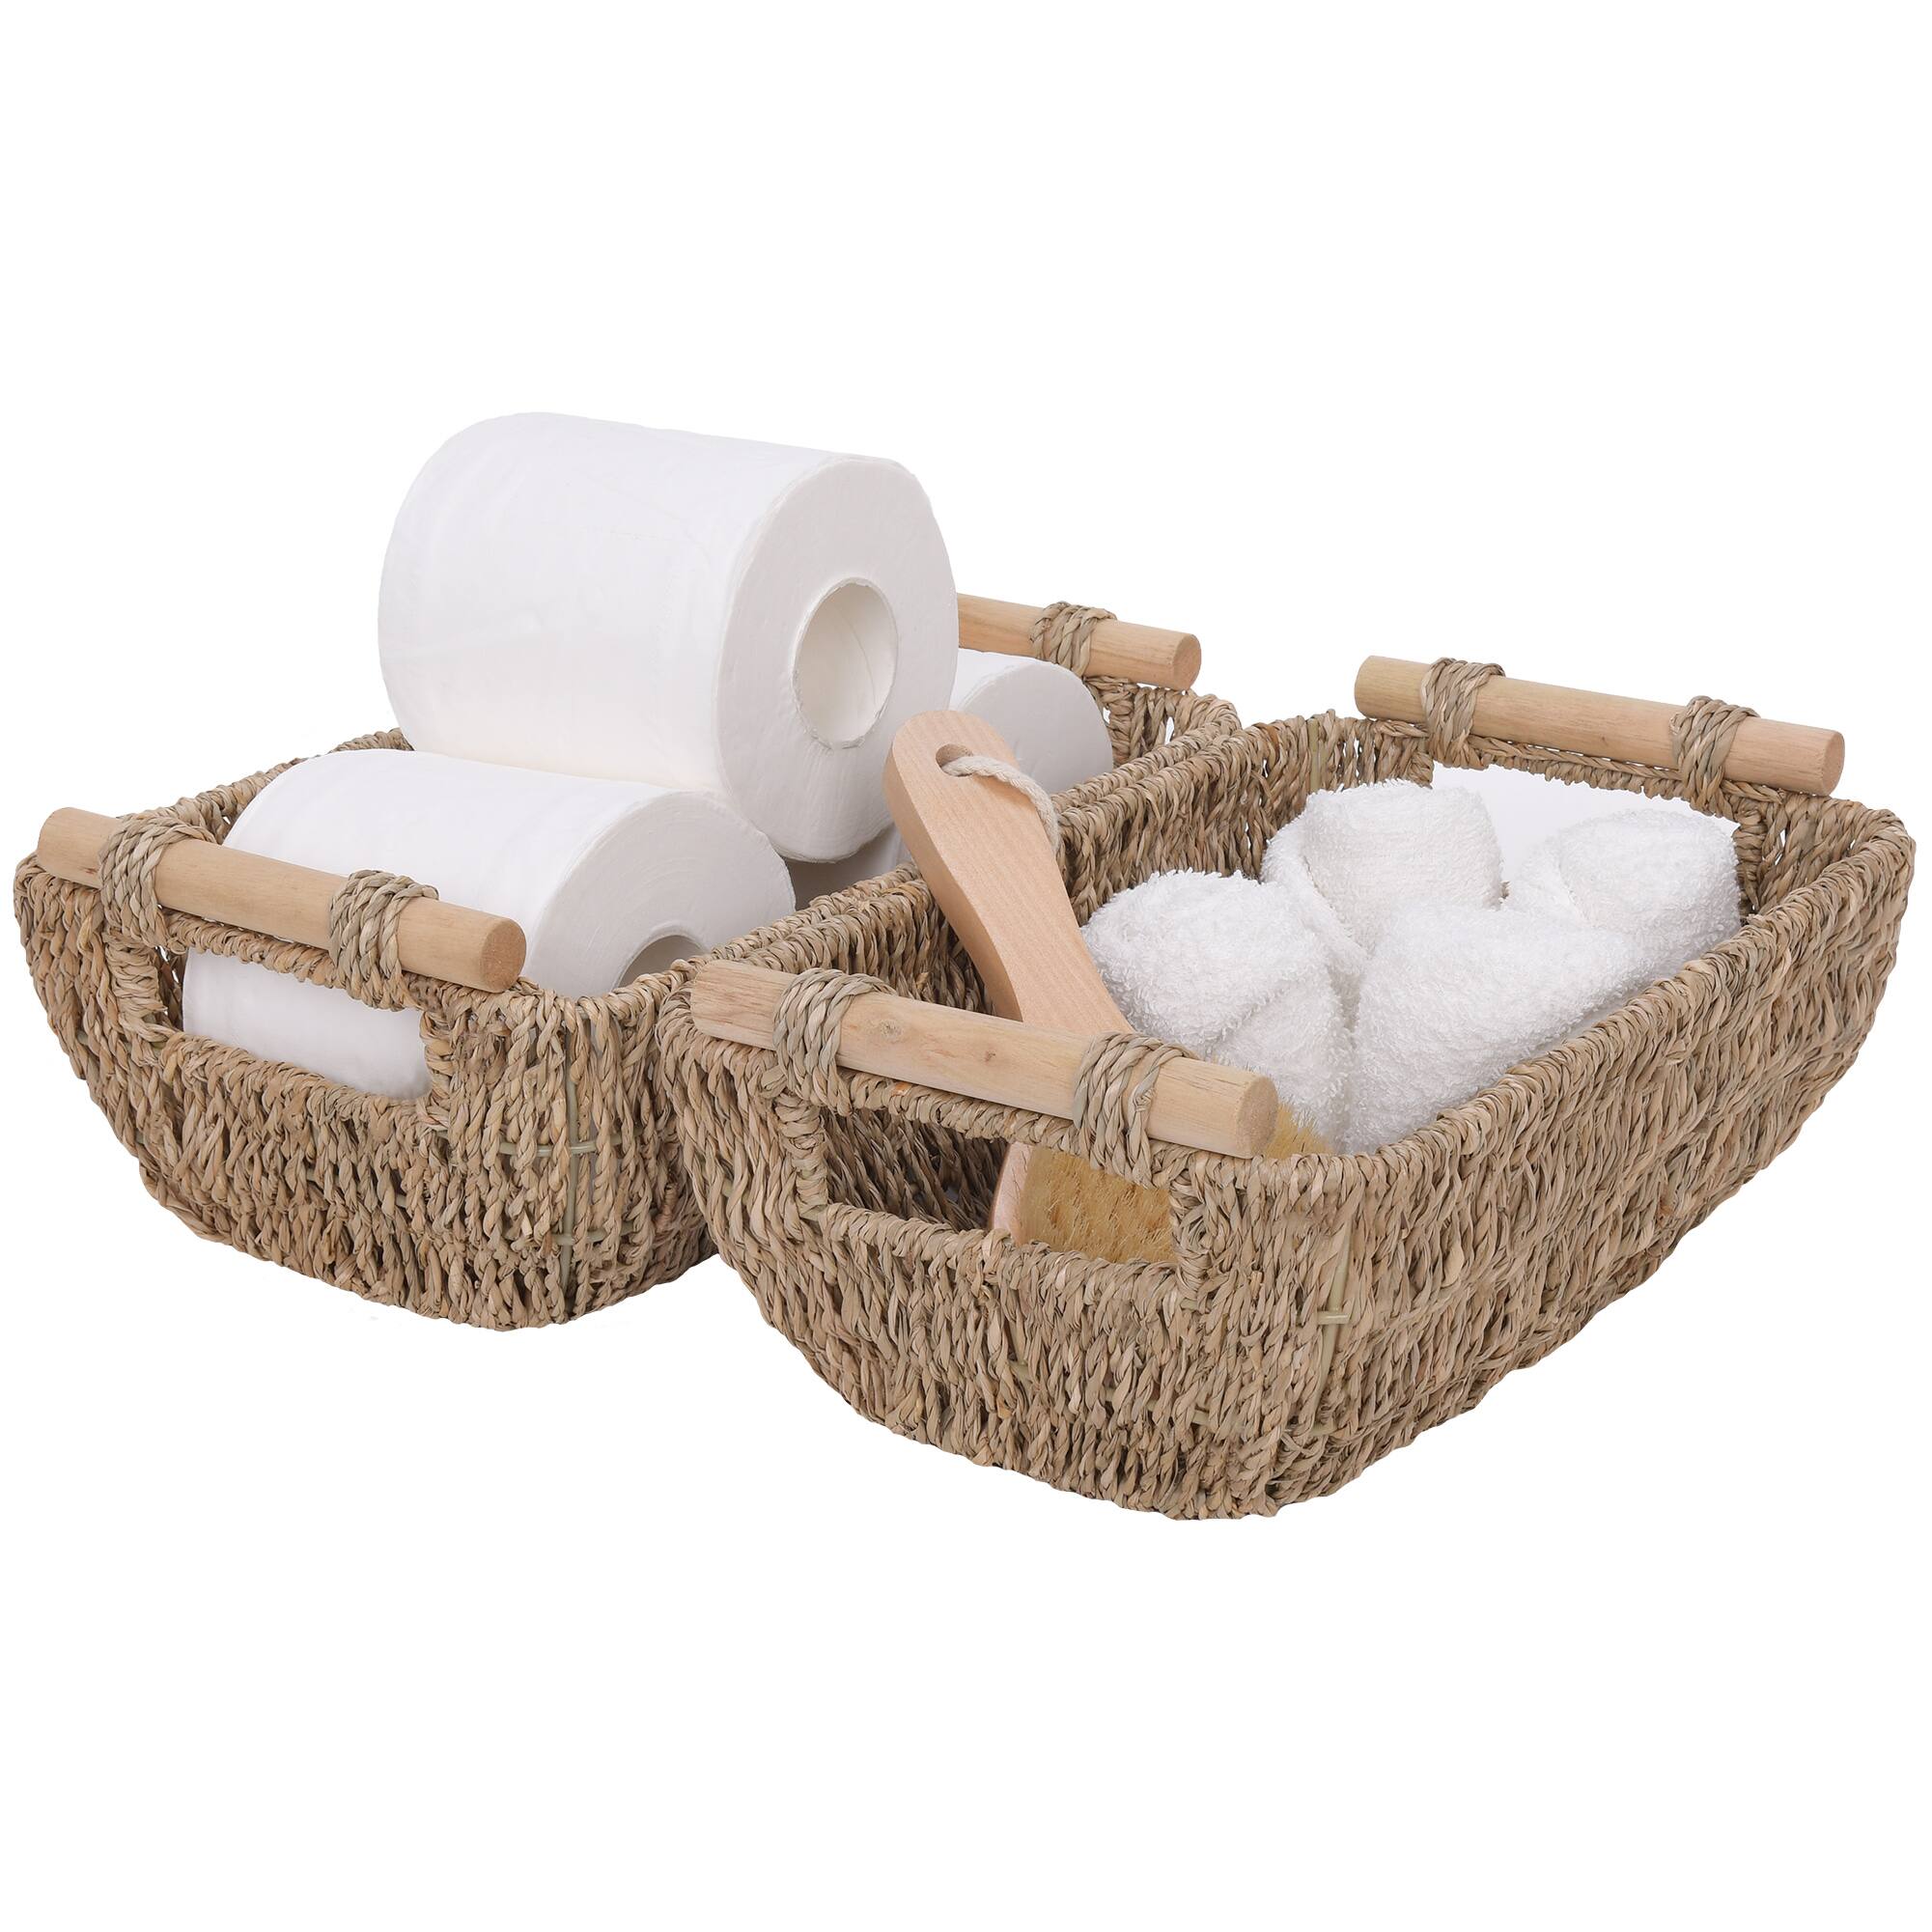 StorageWorks Hand-Woven Small Seagrass Storage Baskets with Wooden Handles, 12" x 7.2" x 4.3", 2-Pack, $18.19 + Free Shipping